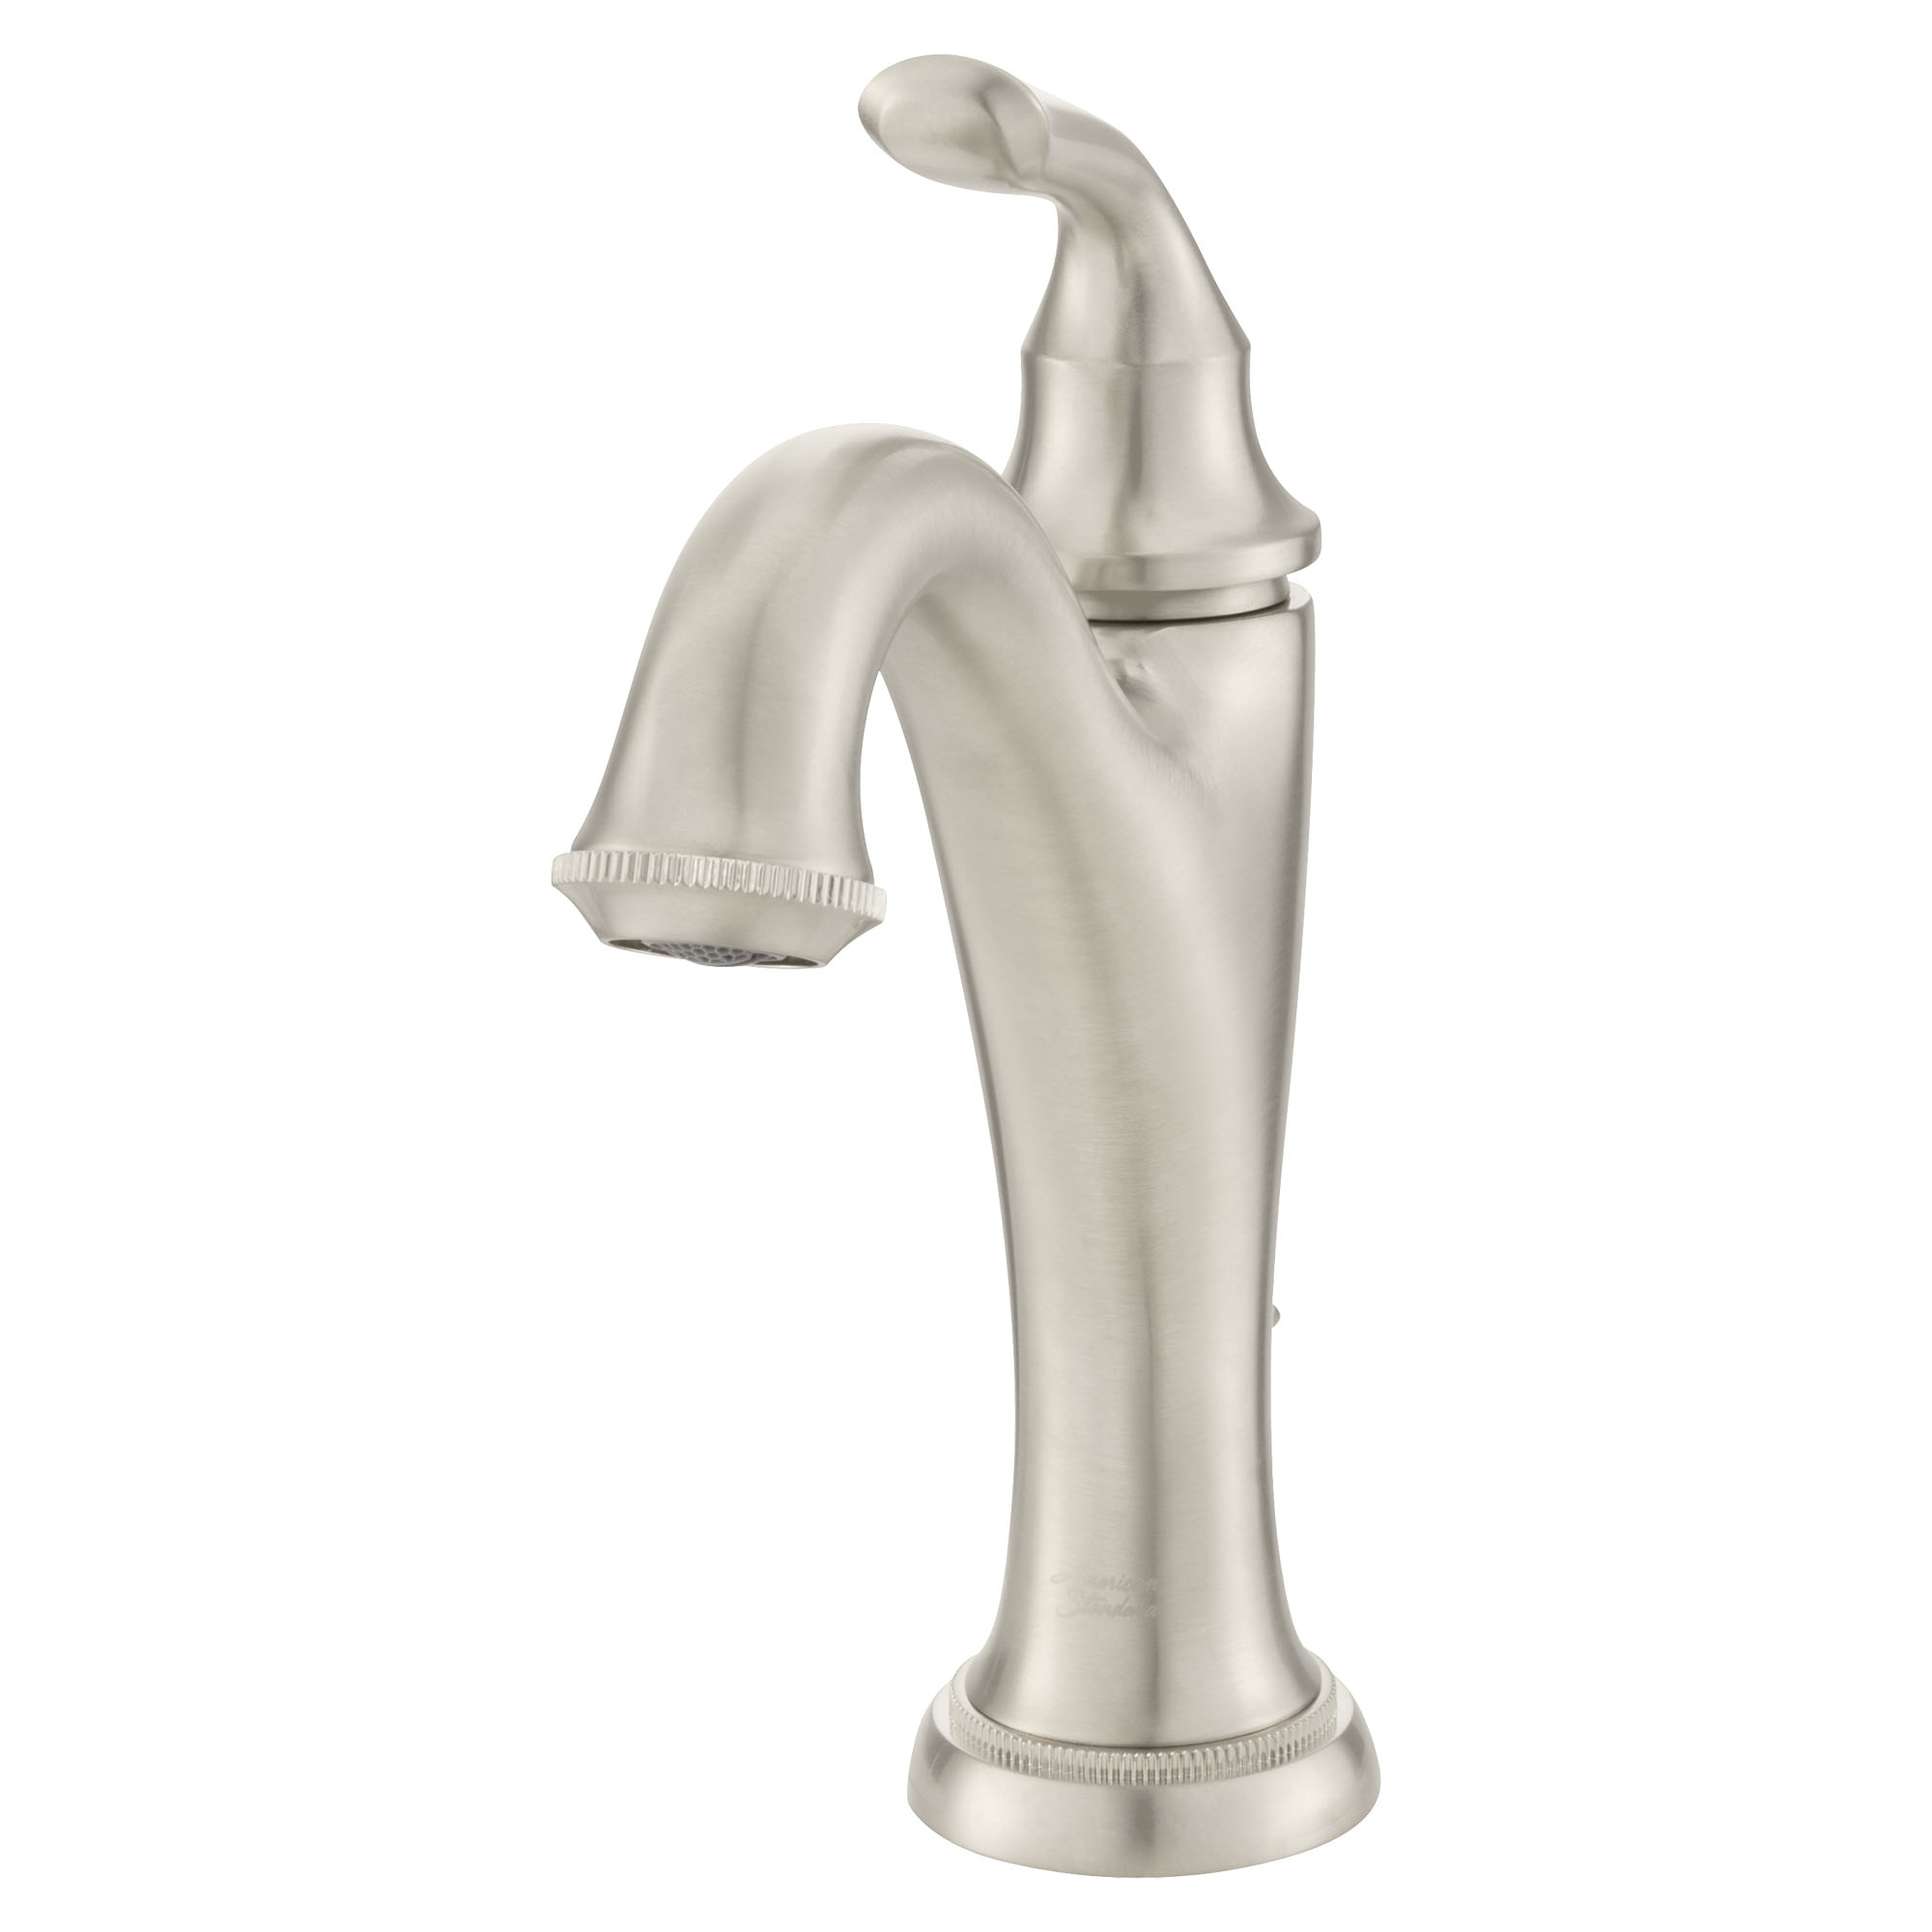 Patience® Single Hole Single-Handle Bathroom Faucet 1.2 gpm/4.5 L/min With Lever Handle